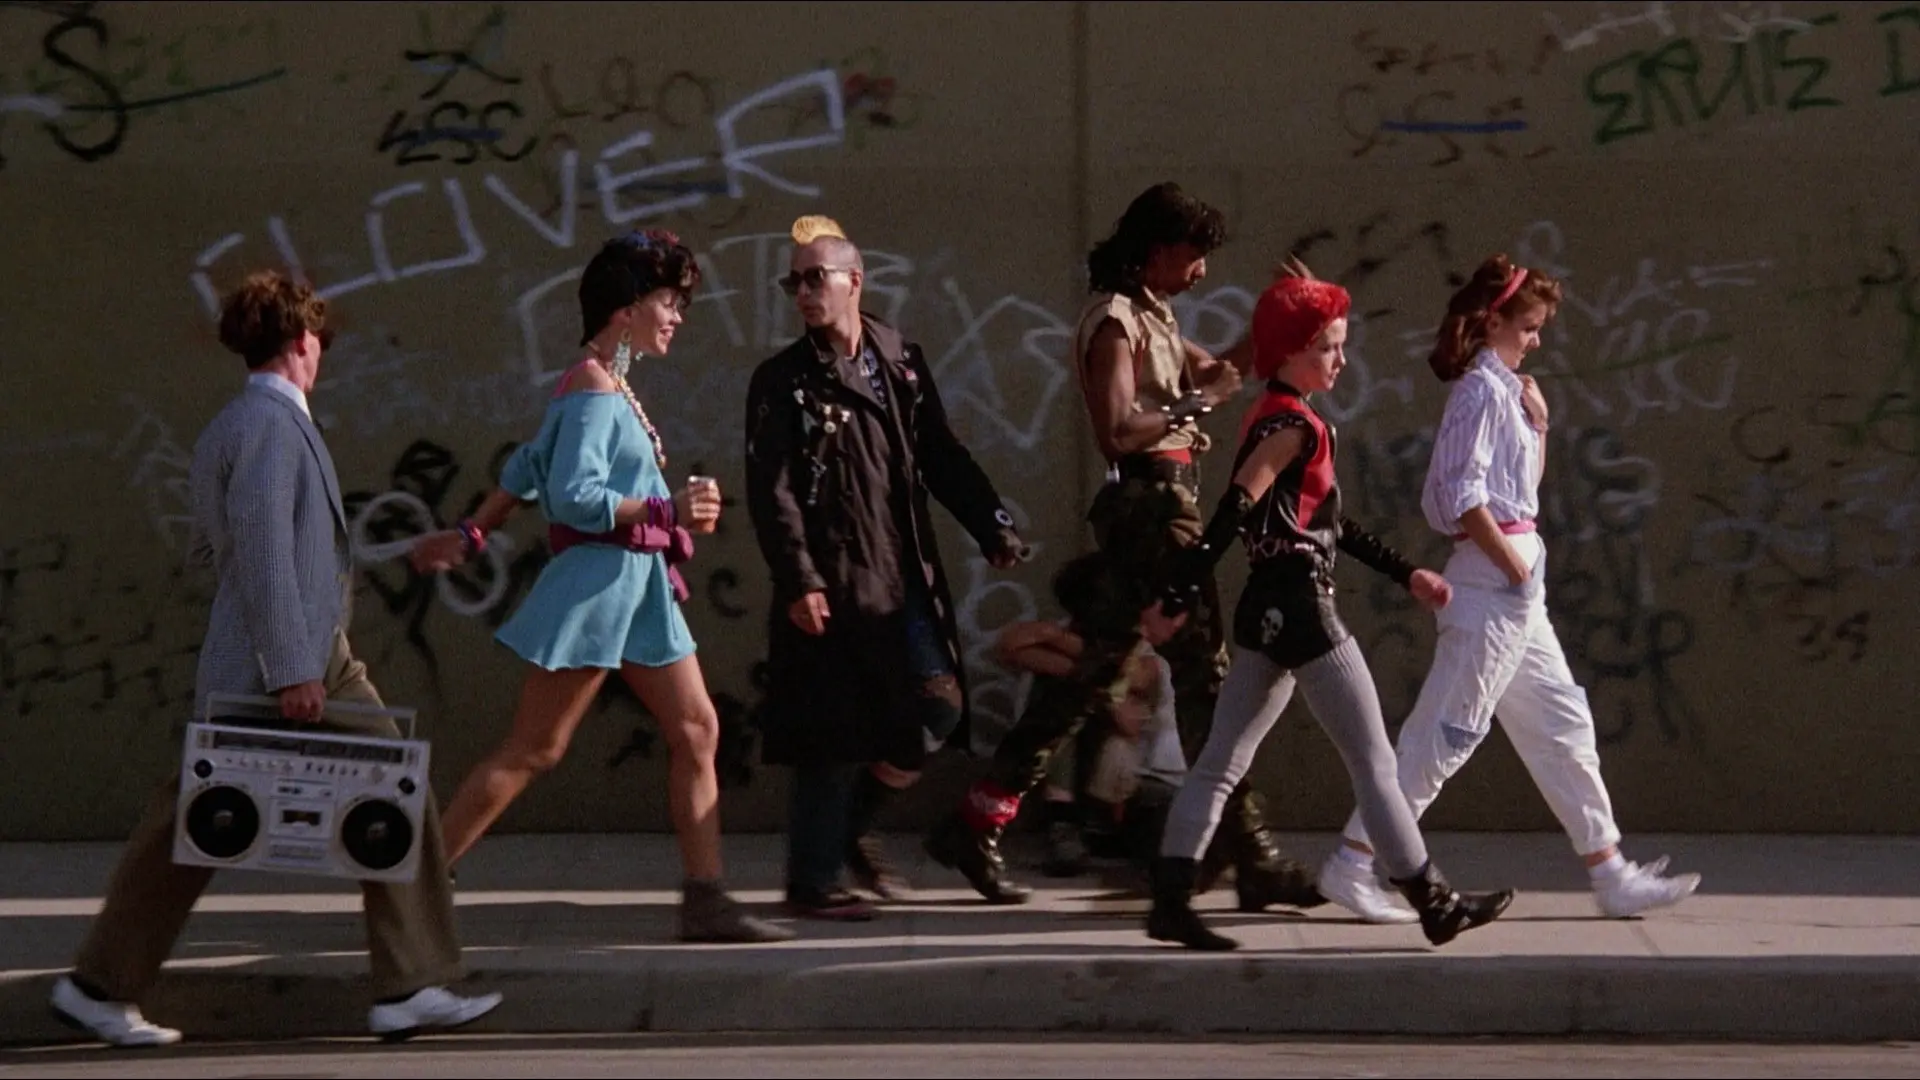 A group of punks from Return of the Living Dead